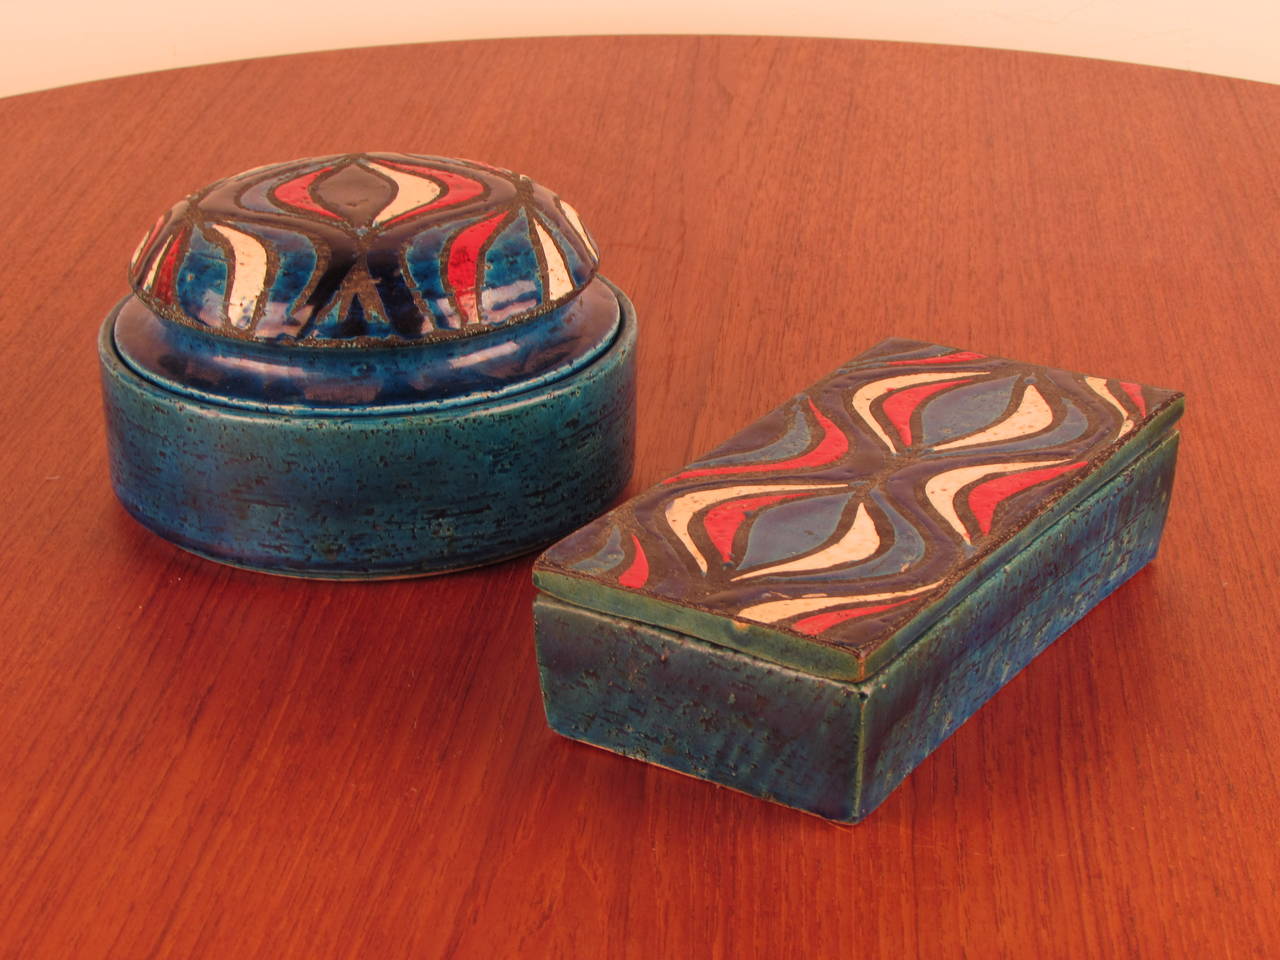 Exceptional design and colors! Utterly gorgeous lidded boxes imported to the US by Rosenthal Netter. These are likely designed by either Bitossi or Londi, but we are unsure. We do know that this is a very, very hard to find design and color way.